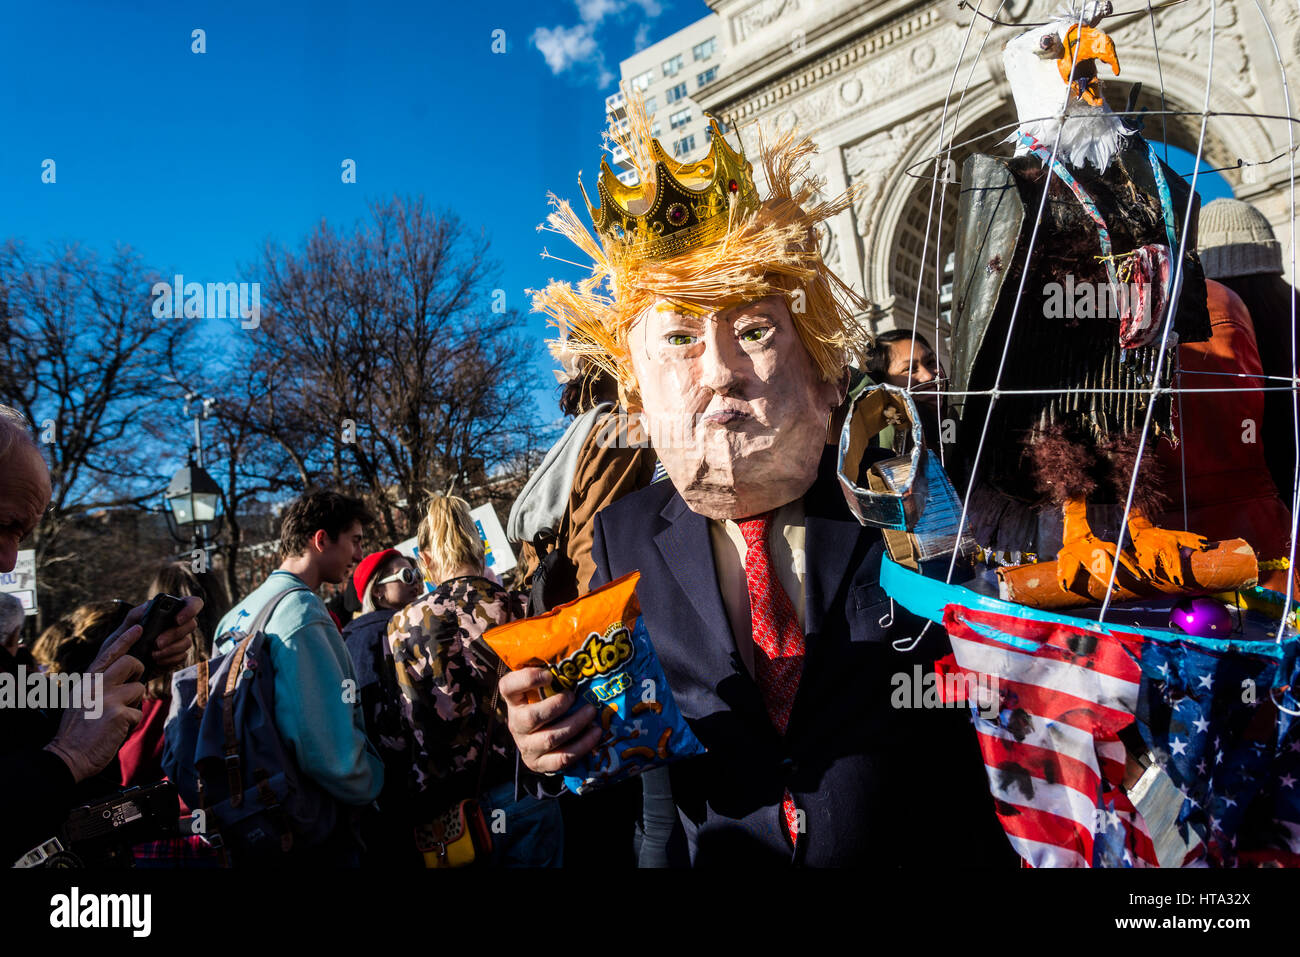 New York, USA. 8th Mar, 2017 trump impersonator Elliot Crown dressed as King Trump as Women marked International Women's Day - A Day Without a Woman, with a rally in Washington Square Park followed by a march. Many women wore red and took the day off as a general strike. Credit: Stacy Walsh Rosenstock/Alamy Stock Photo